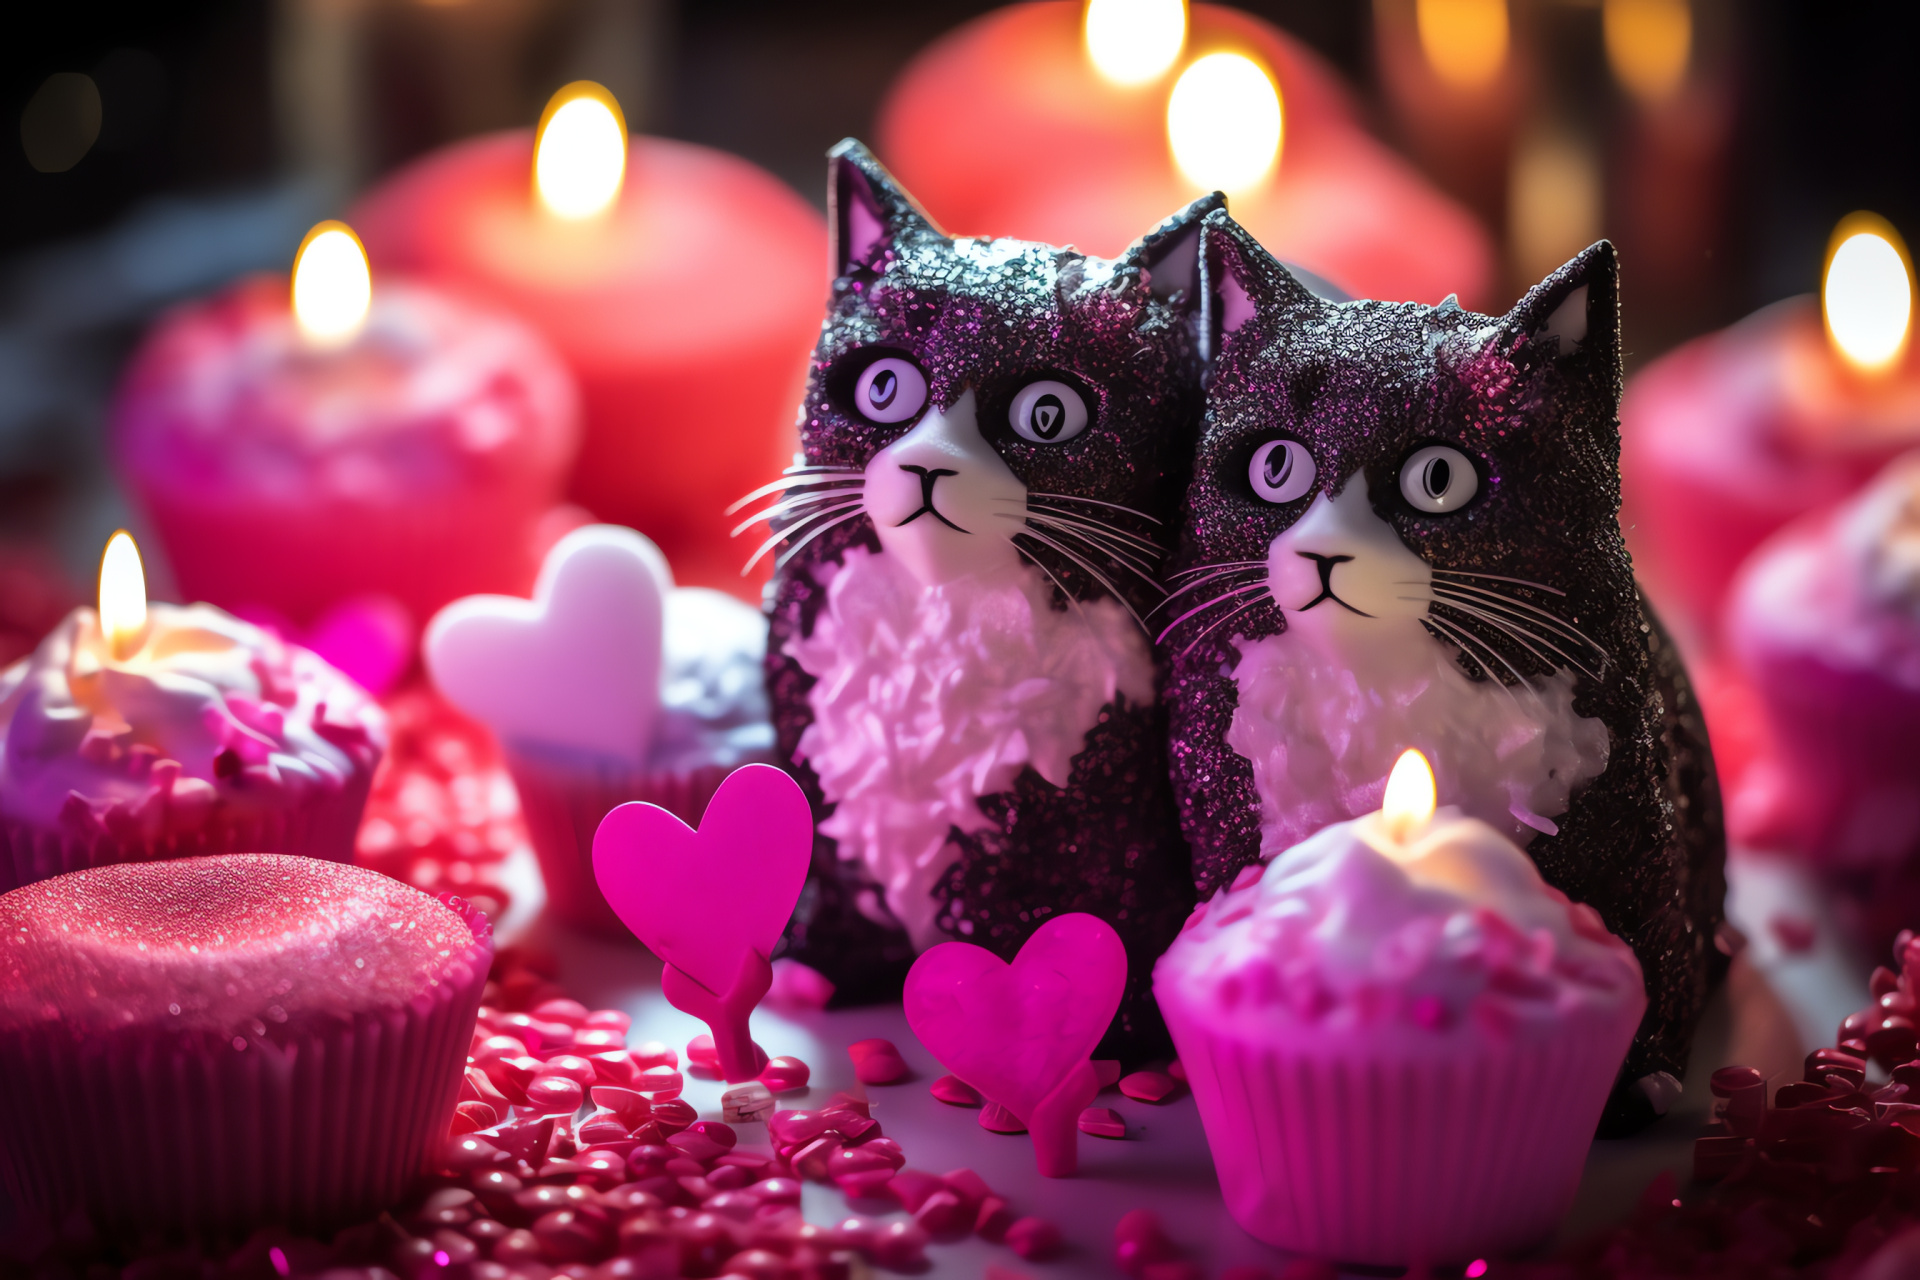 Valentine pussycats, Sweet confection, Creamy topping, Confectionary decorations, HD Desktop Wallpaper